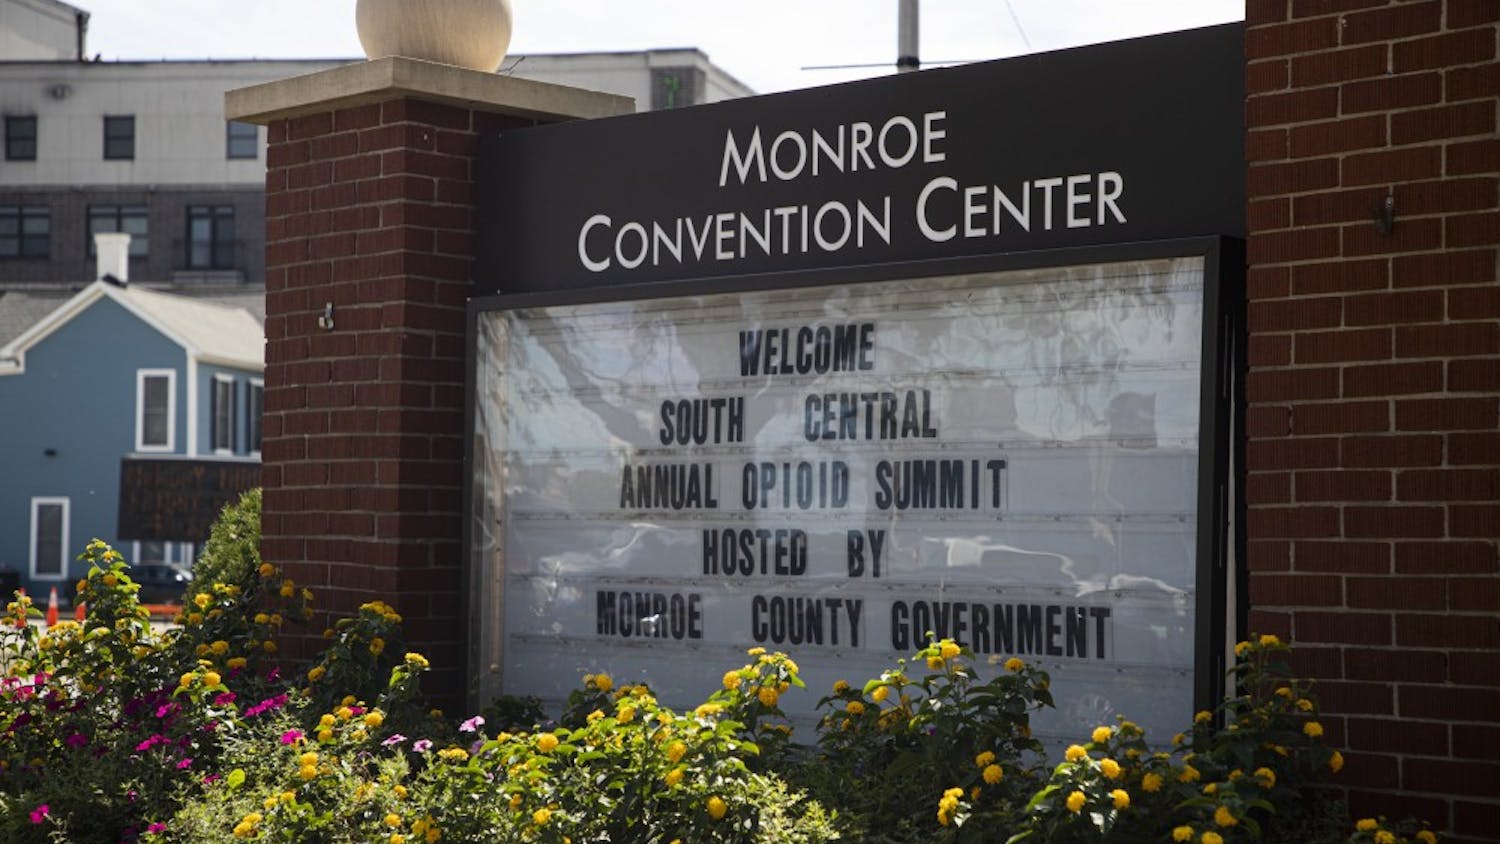 Monroe County presents the Annual Opioid Summit on Sept. 24 at Monroe County Convention Center. The summit had over hundreds of professionals, specialists and concerned citizens gathered together to discuss issues and concerns related to the opioid epidemic.